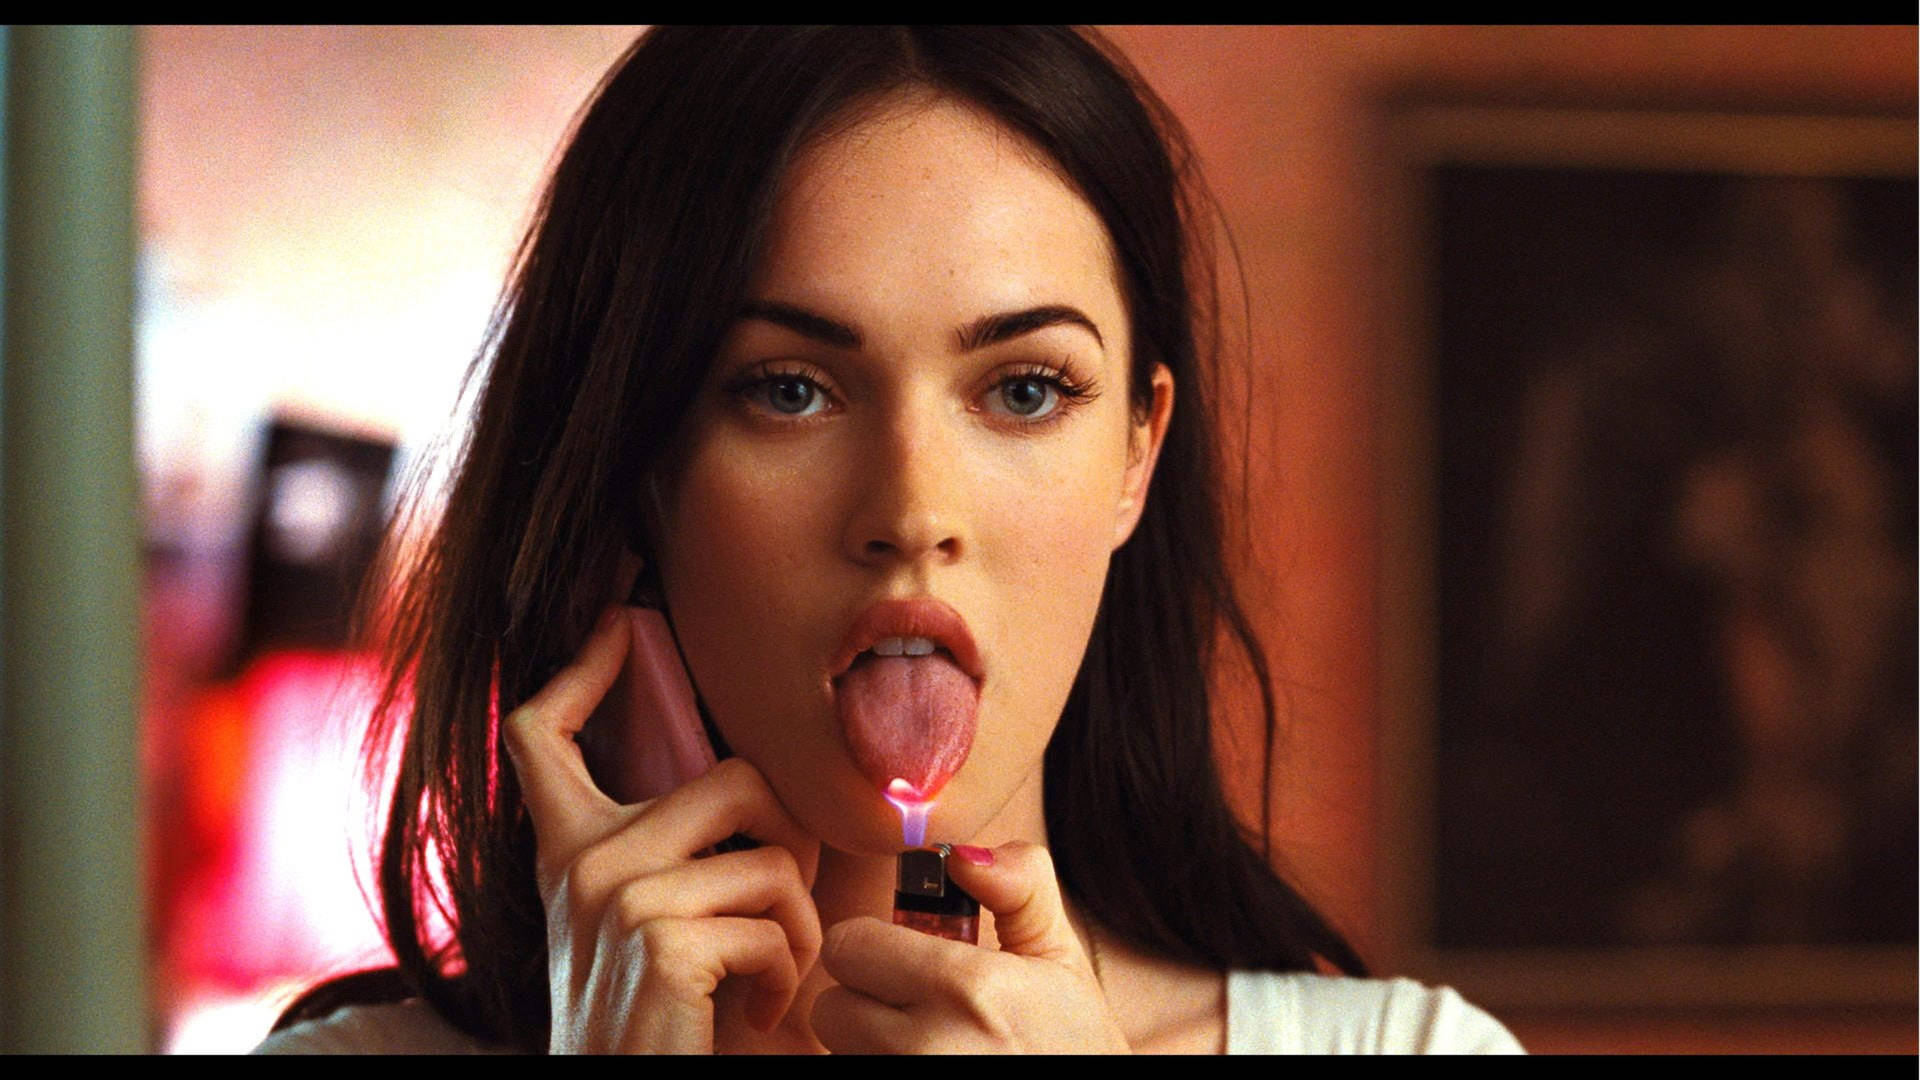 Megan Fox 2560X1440 Wallpaper and Background Image